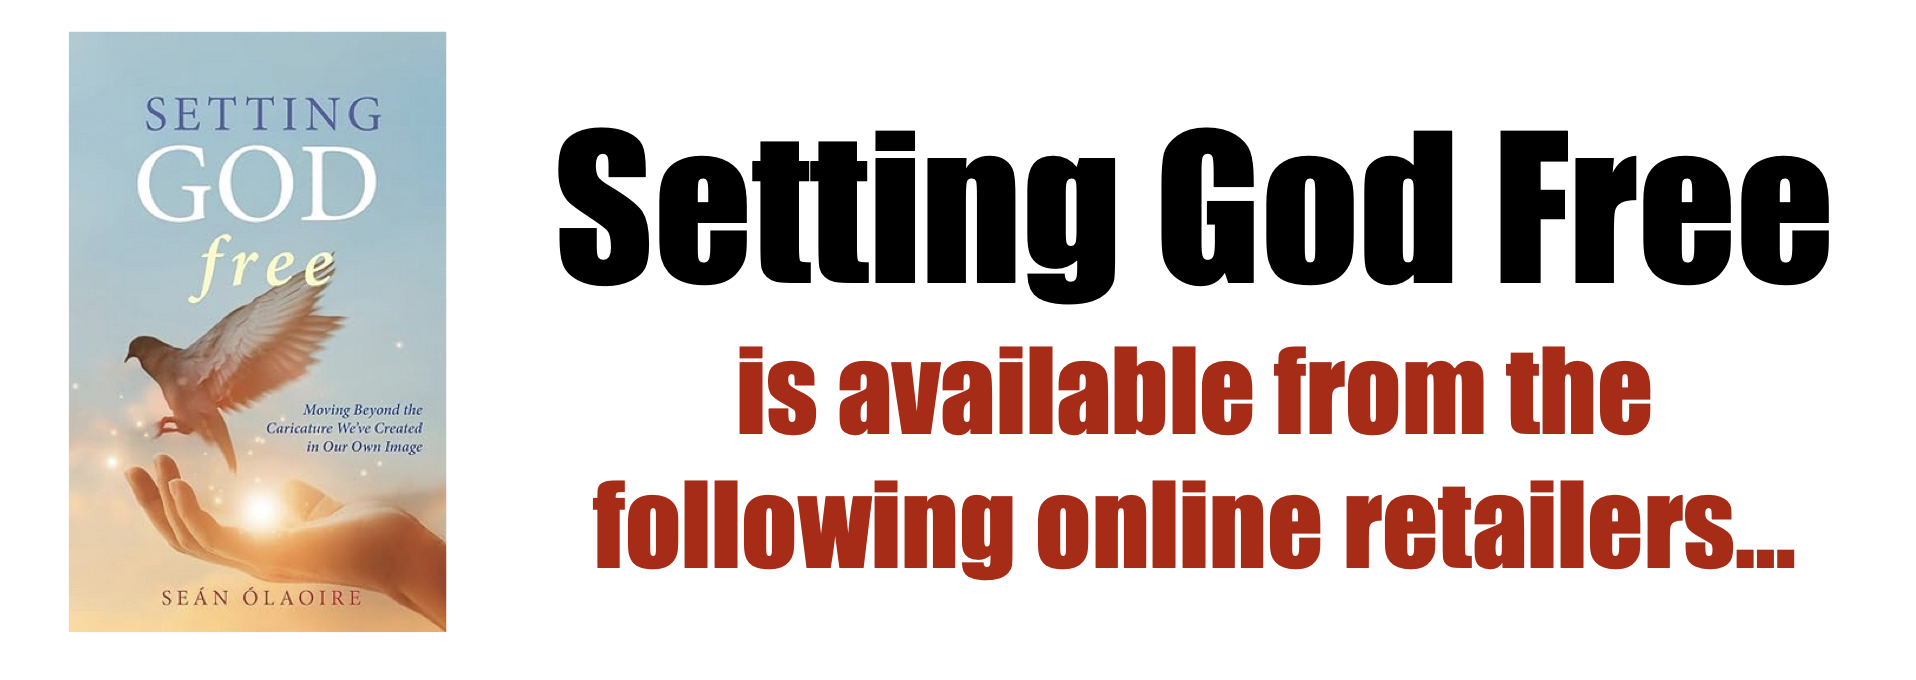 Setting God Free is available from the following online retailers